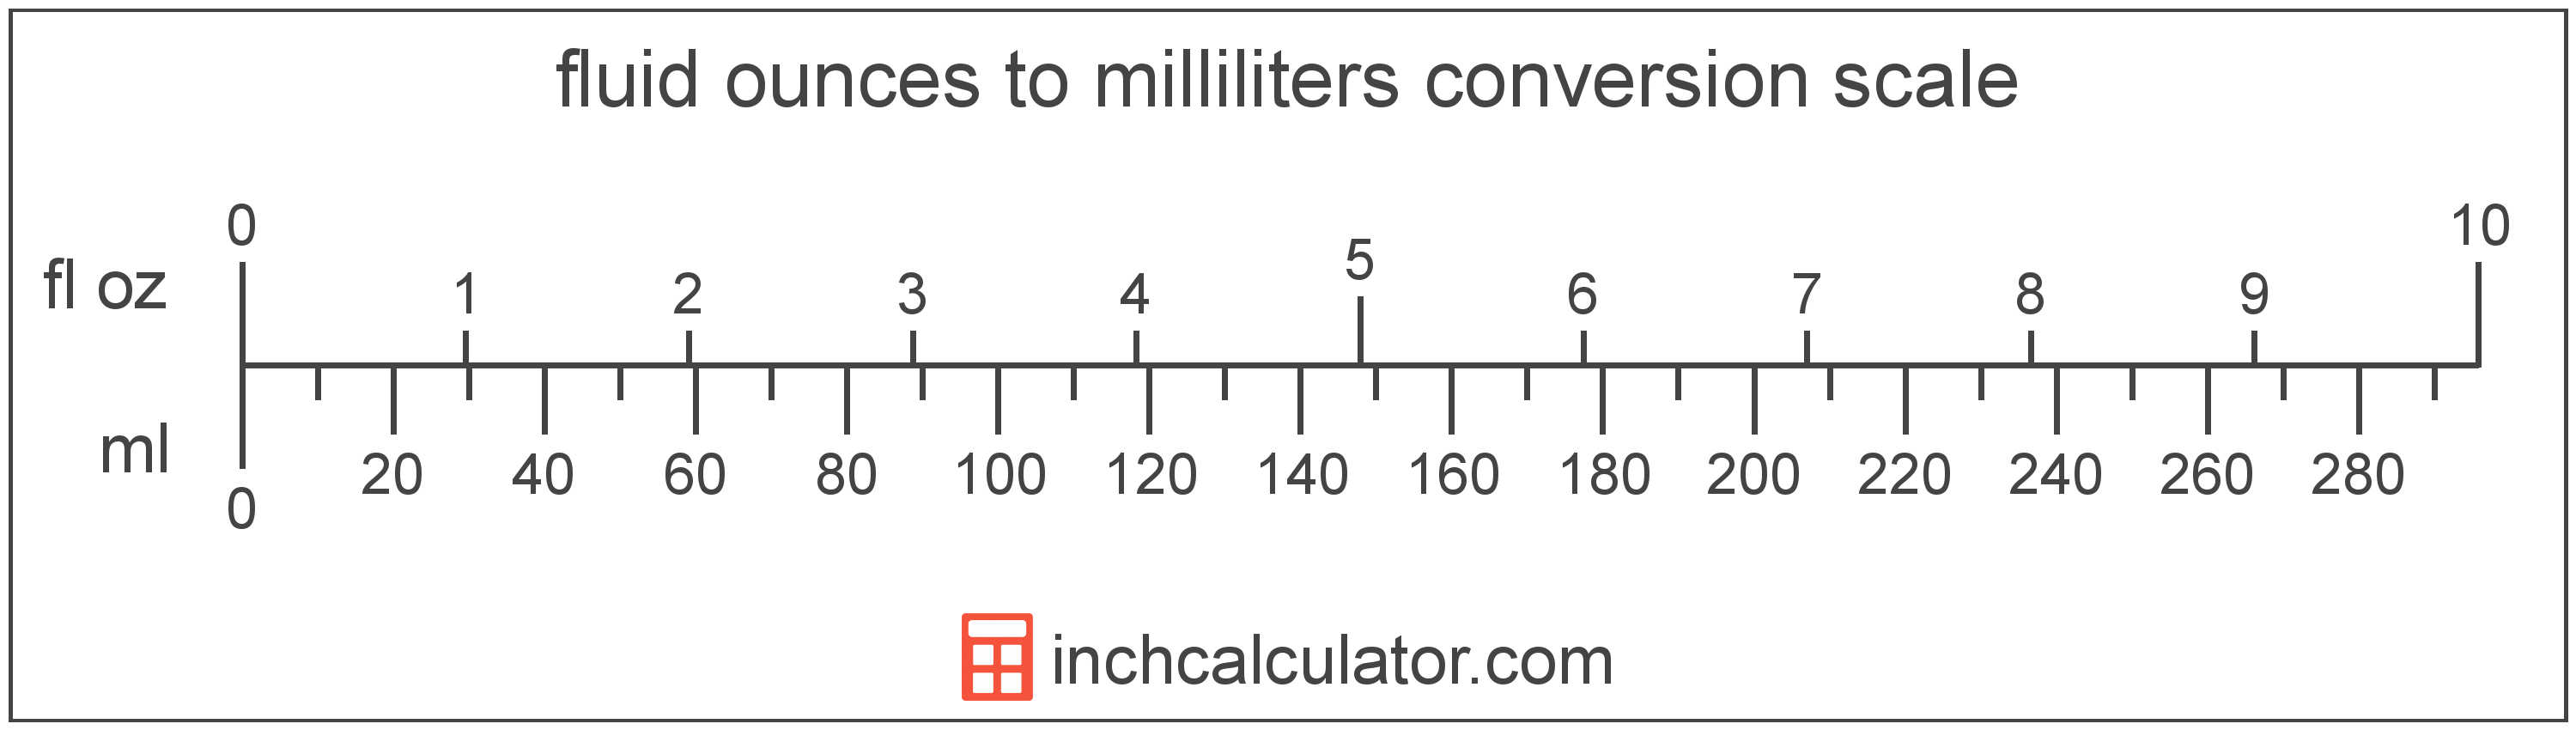 conversion scale showing fluid ounces and equivalent milliliters volume values